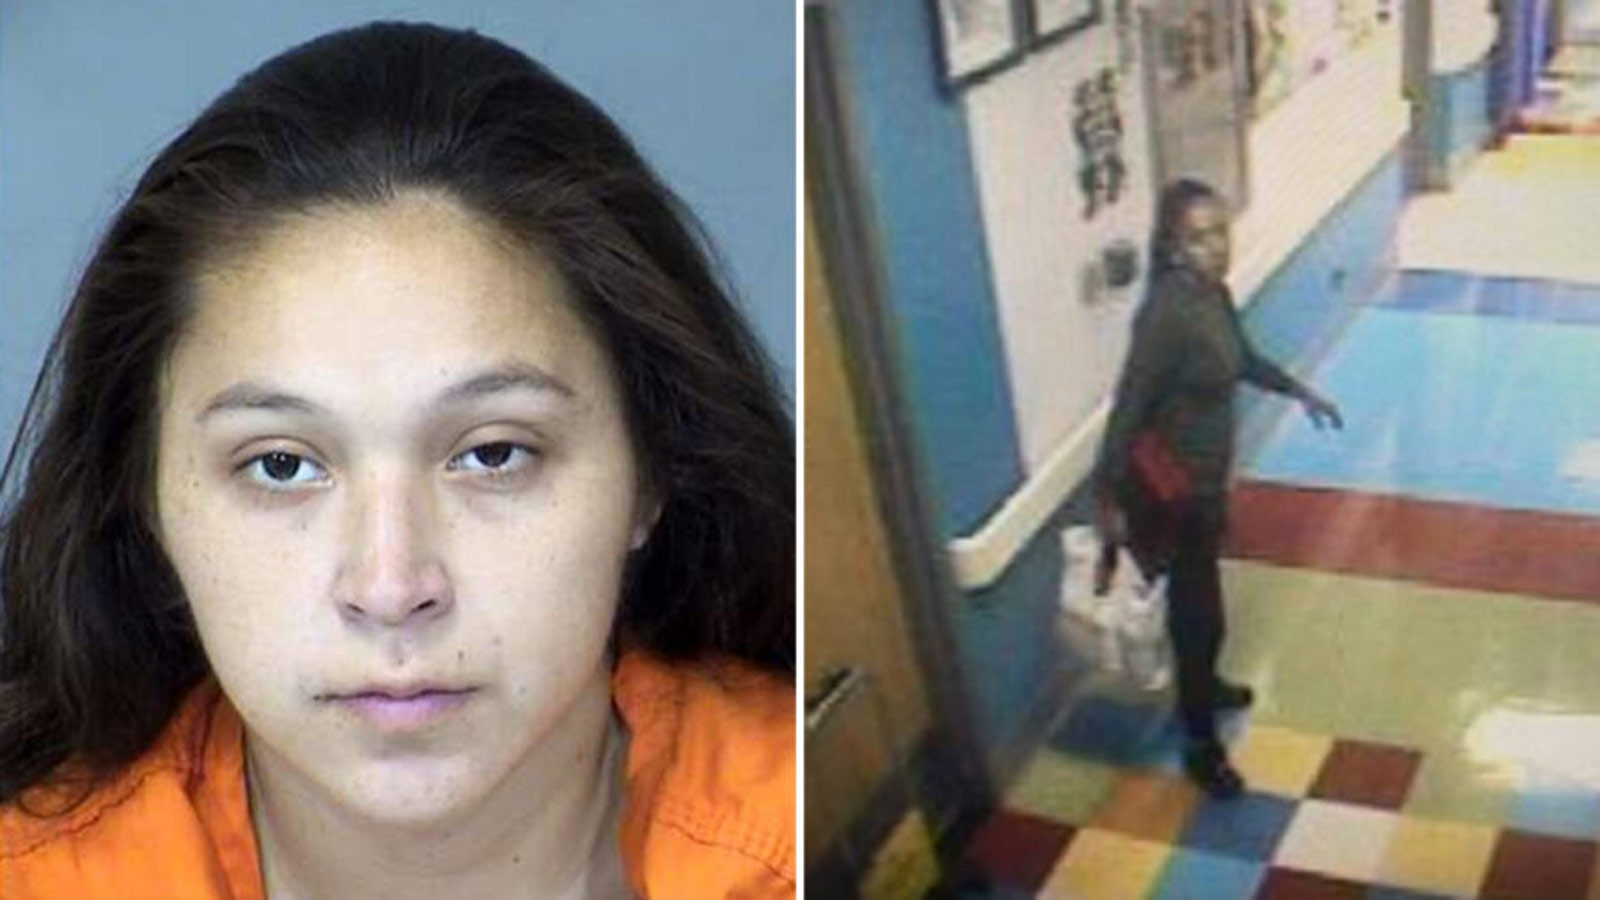 Mugshot of Rosa Santana and surveillance image of her carrying her baby. Santana faces child abuse ...